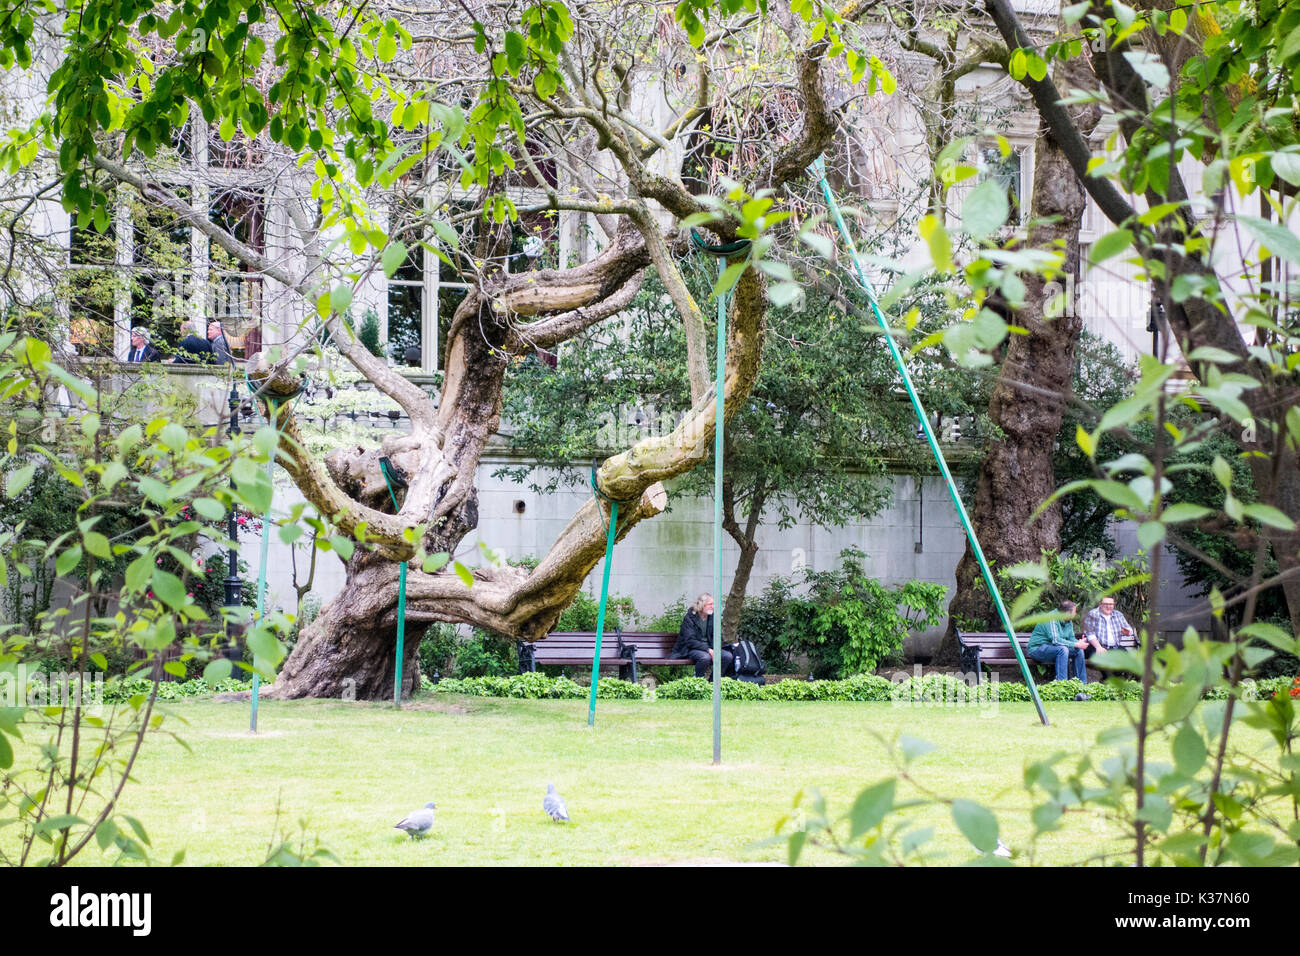 Ancient catalpa with branches supported by wooden props, Victoria Embankment Gardens, City of London, UK Stock Photo